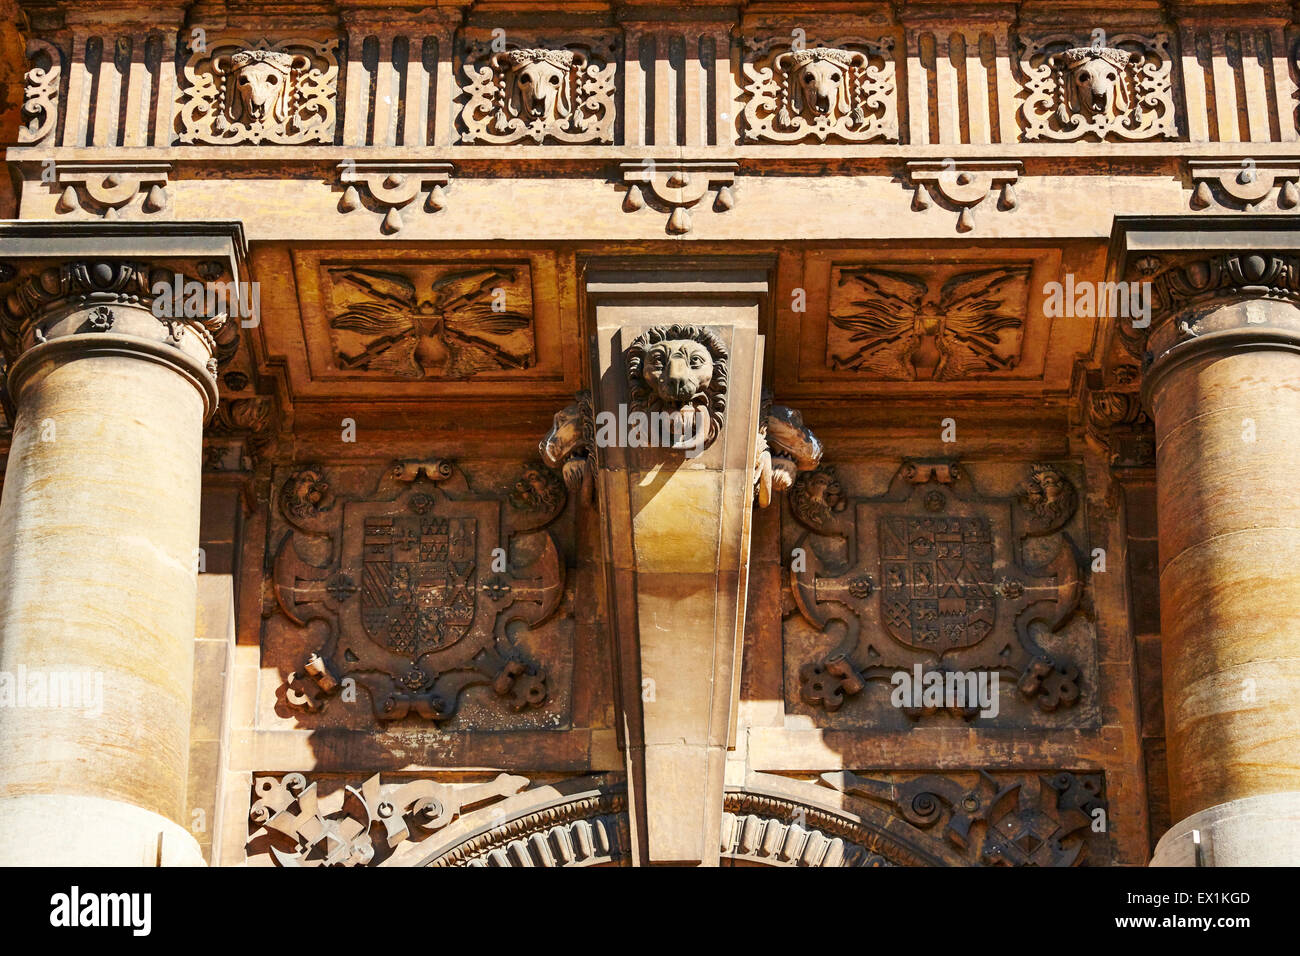 Architectural details at Wollaton Hall, Nottingham, England. Stock Photo